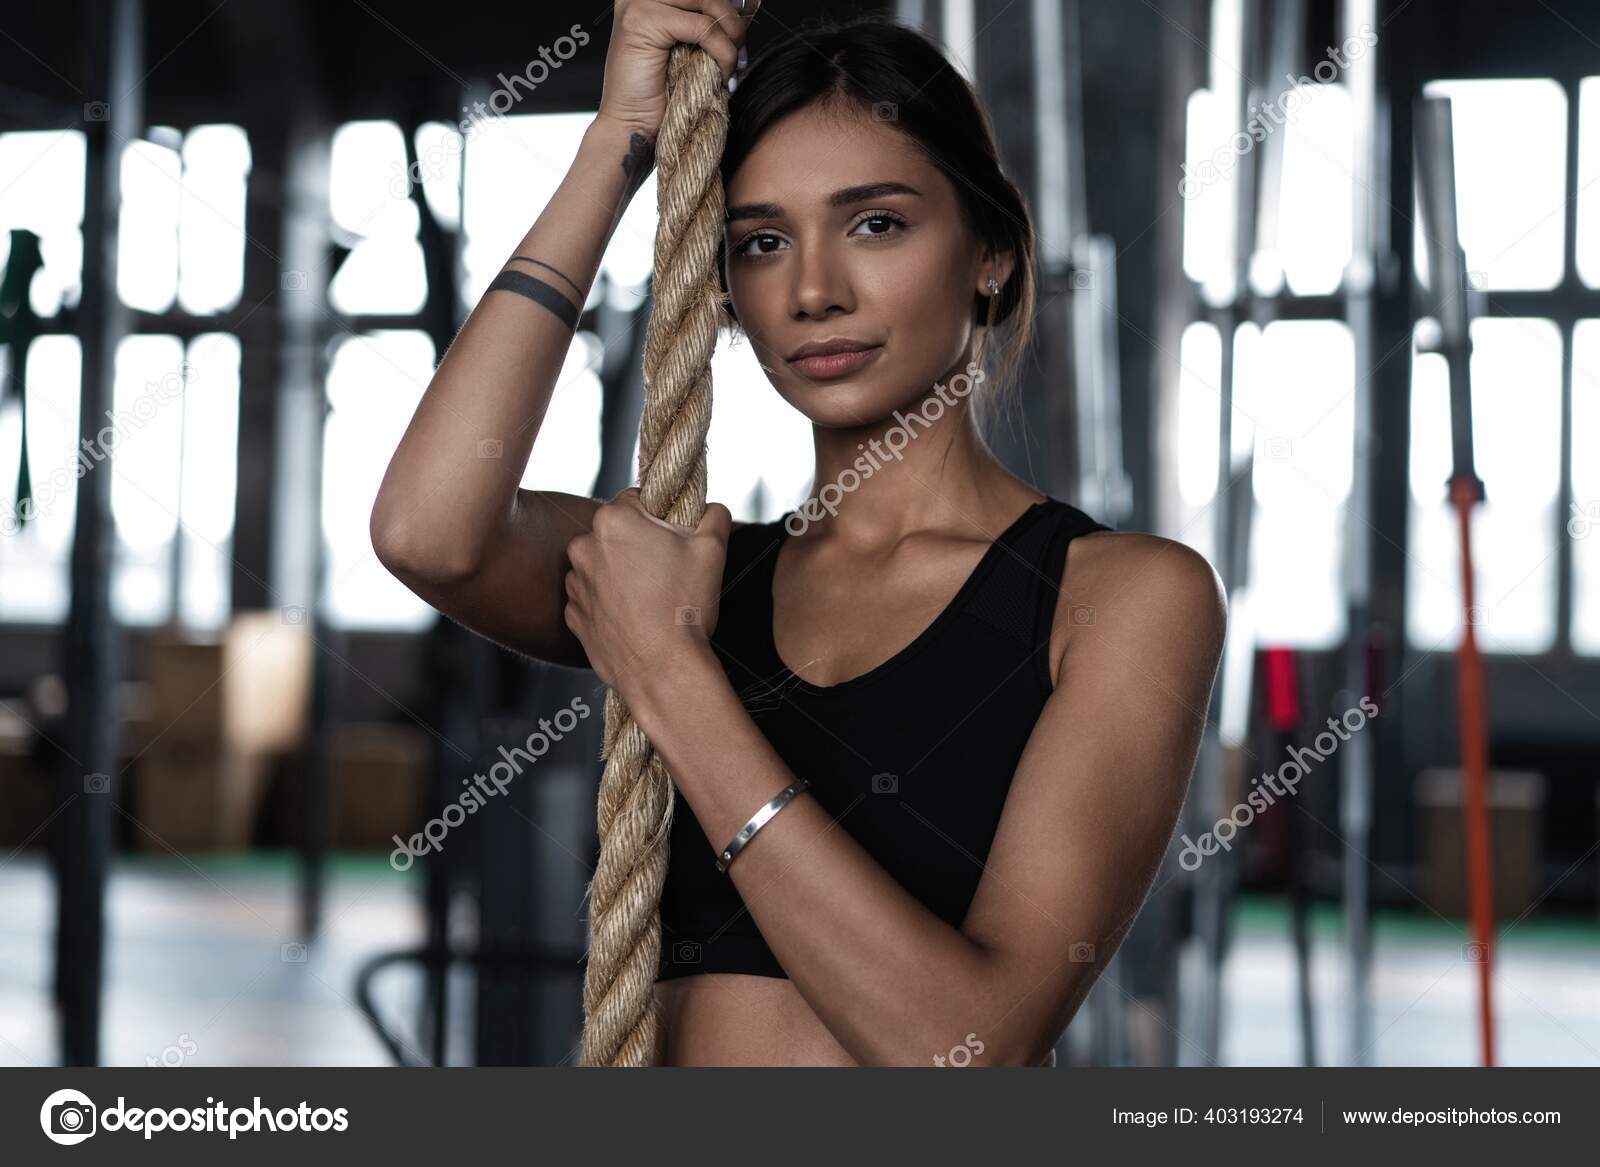 Exercising woman holding gymnast rings and looking away. Female